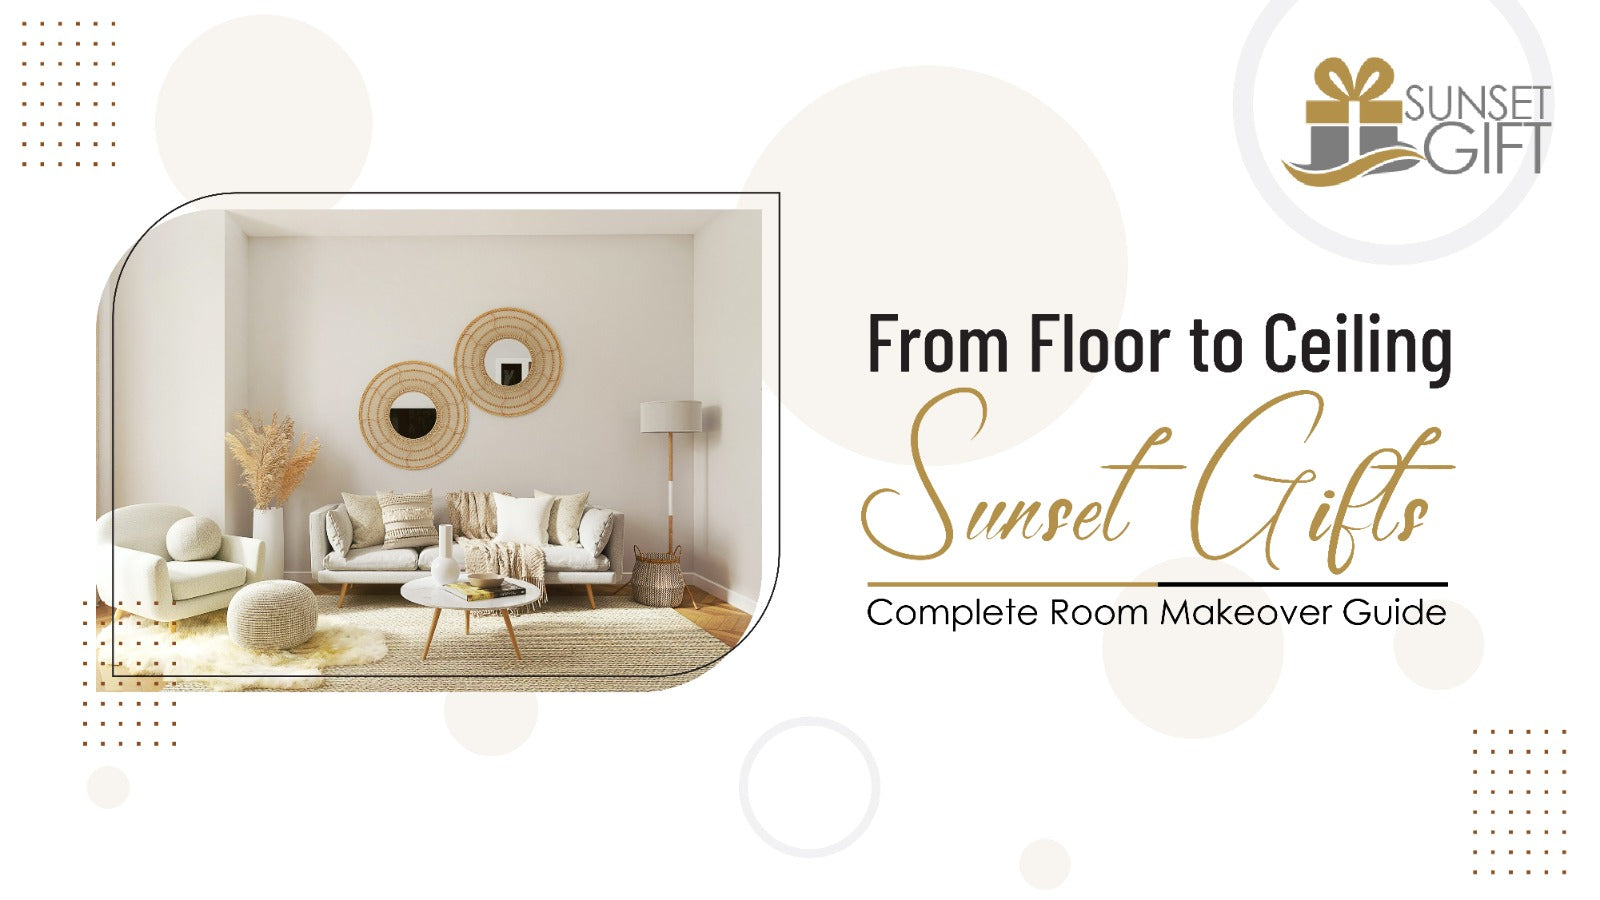 From Floor to Ceiling: SunsetGift's Complete Room Makeover Guide